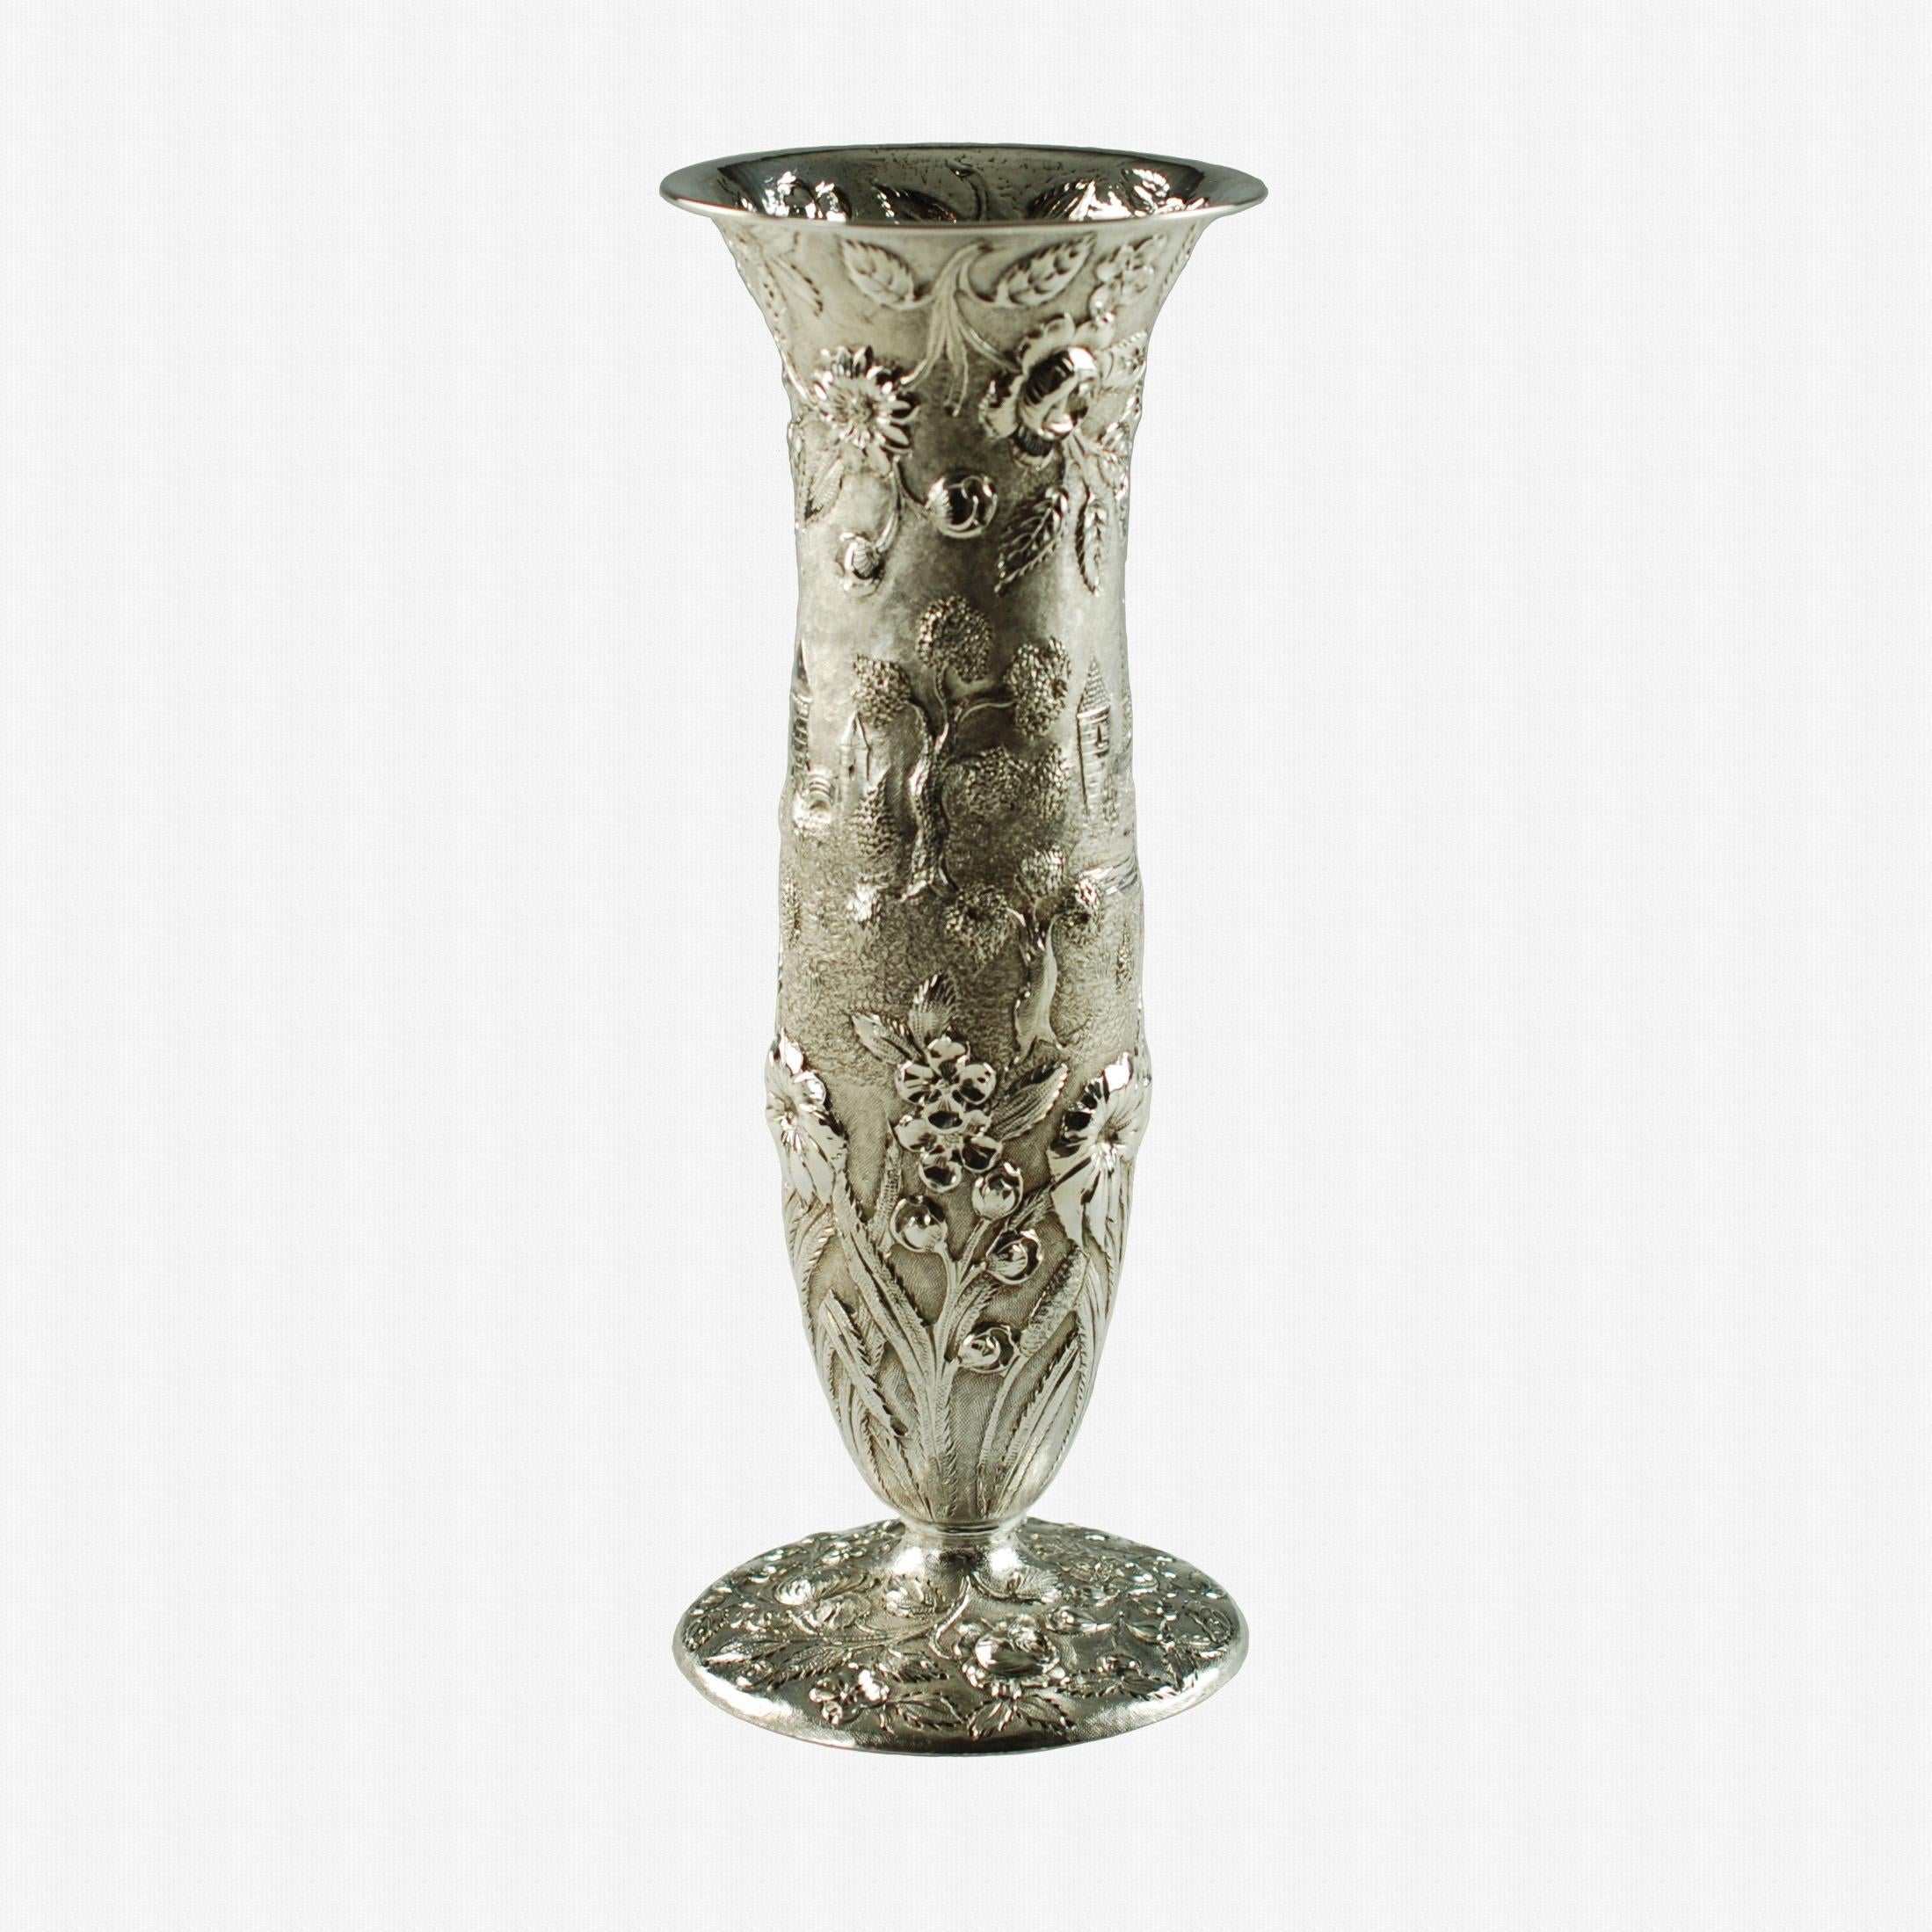 This elegant early 20th century sterling silver bud vase has a traditional trumpet form with a wide pedestal base and has been finished in the highly desirable Castle pattern. The ornate repoussé decoration consists of detailed roses and foliage on